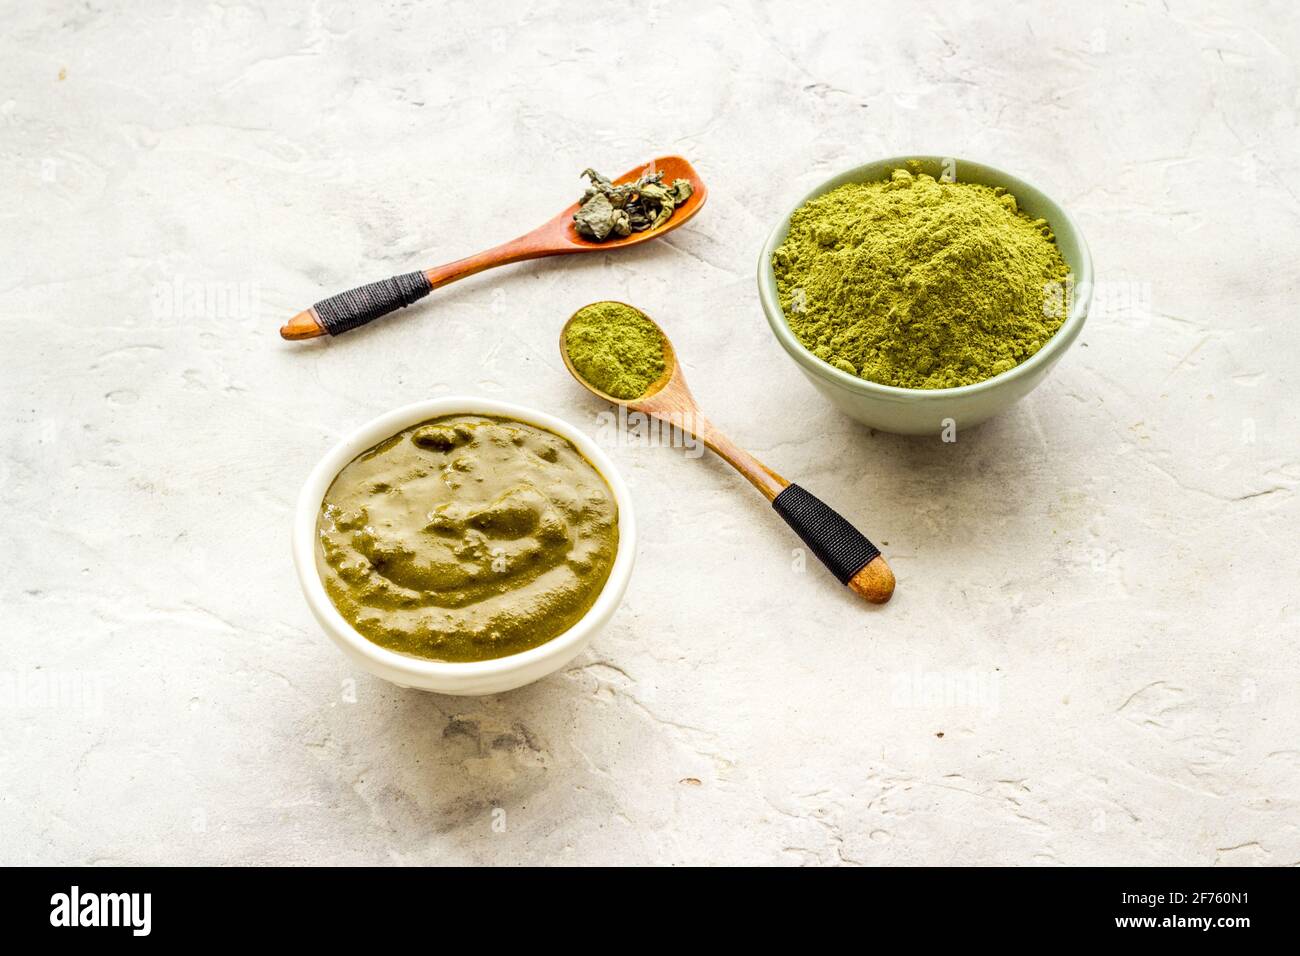 Henna powder and henna paste for herbal natural hair dye Stock Photo - Alamy